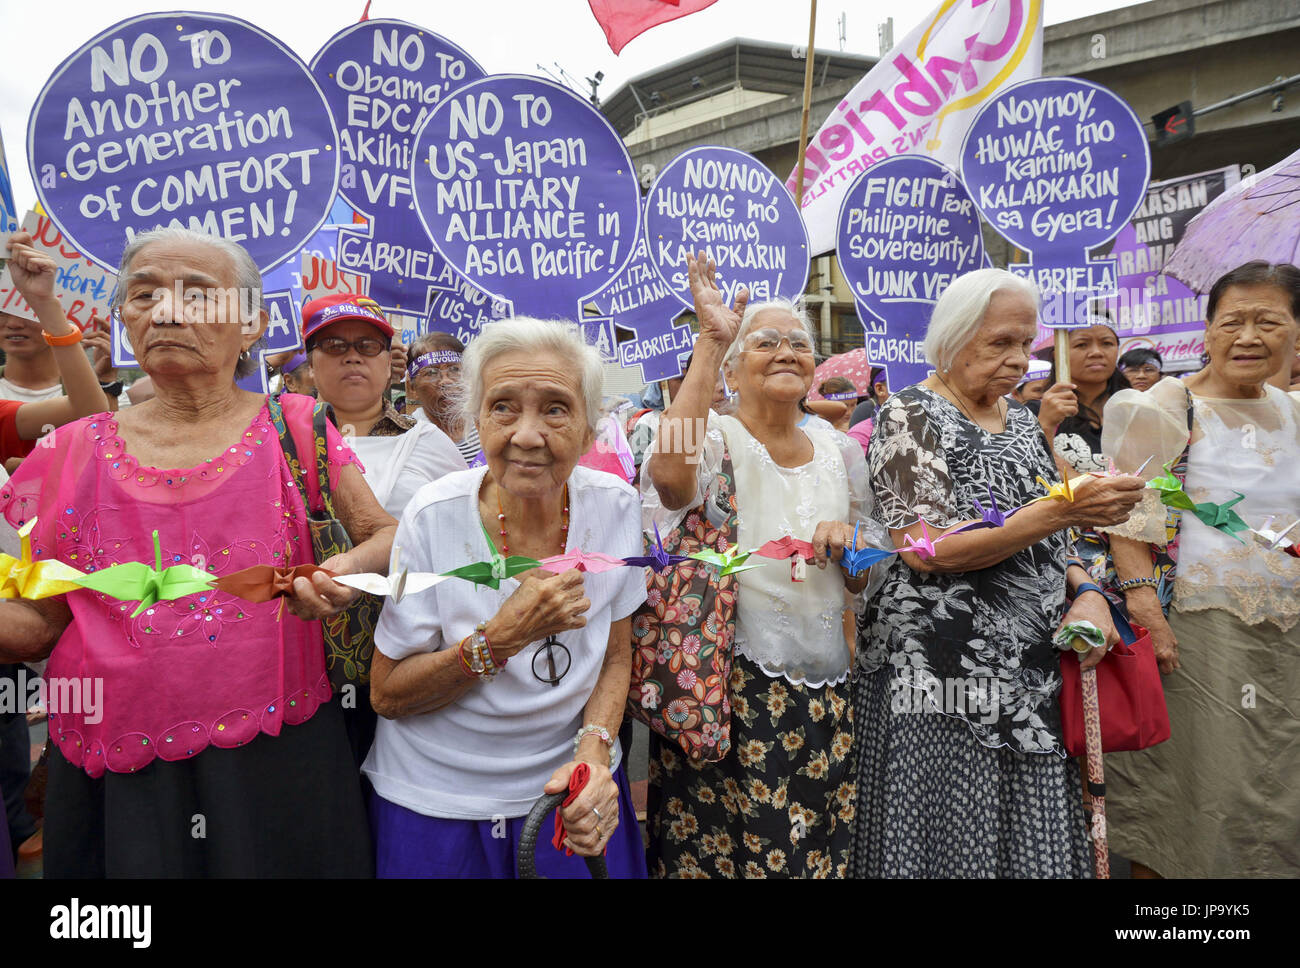 Filipino women forced to work in Japanese military brothels during World War II lead a protest near Malacanang Palace in Manila where Philippine President Benigno Aquino welcomed and met with visiting Japanese Emperor Akihito and Empress Michiko on Jan. 27, 2016. The former so-called "comfort women," who are now mainly in their 80s, said they were availing themselves of the opportunity presented by the emperor's visit to demand justice from the Japanese government for their sufferings during the 1942-1945 Japanese occupation. (Kyodo) ==Kyodo Stock Photo